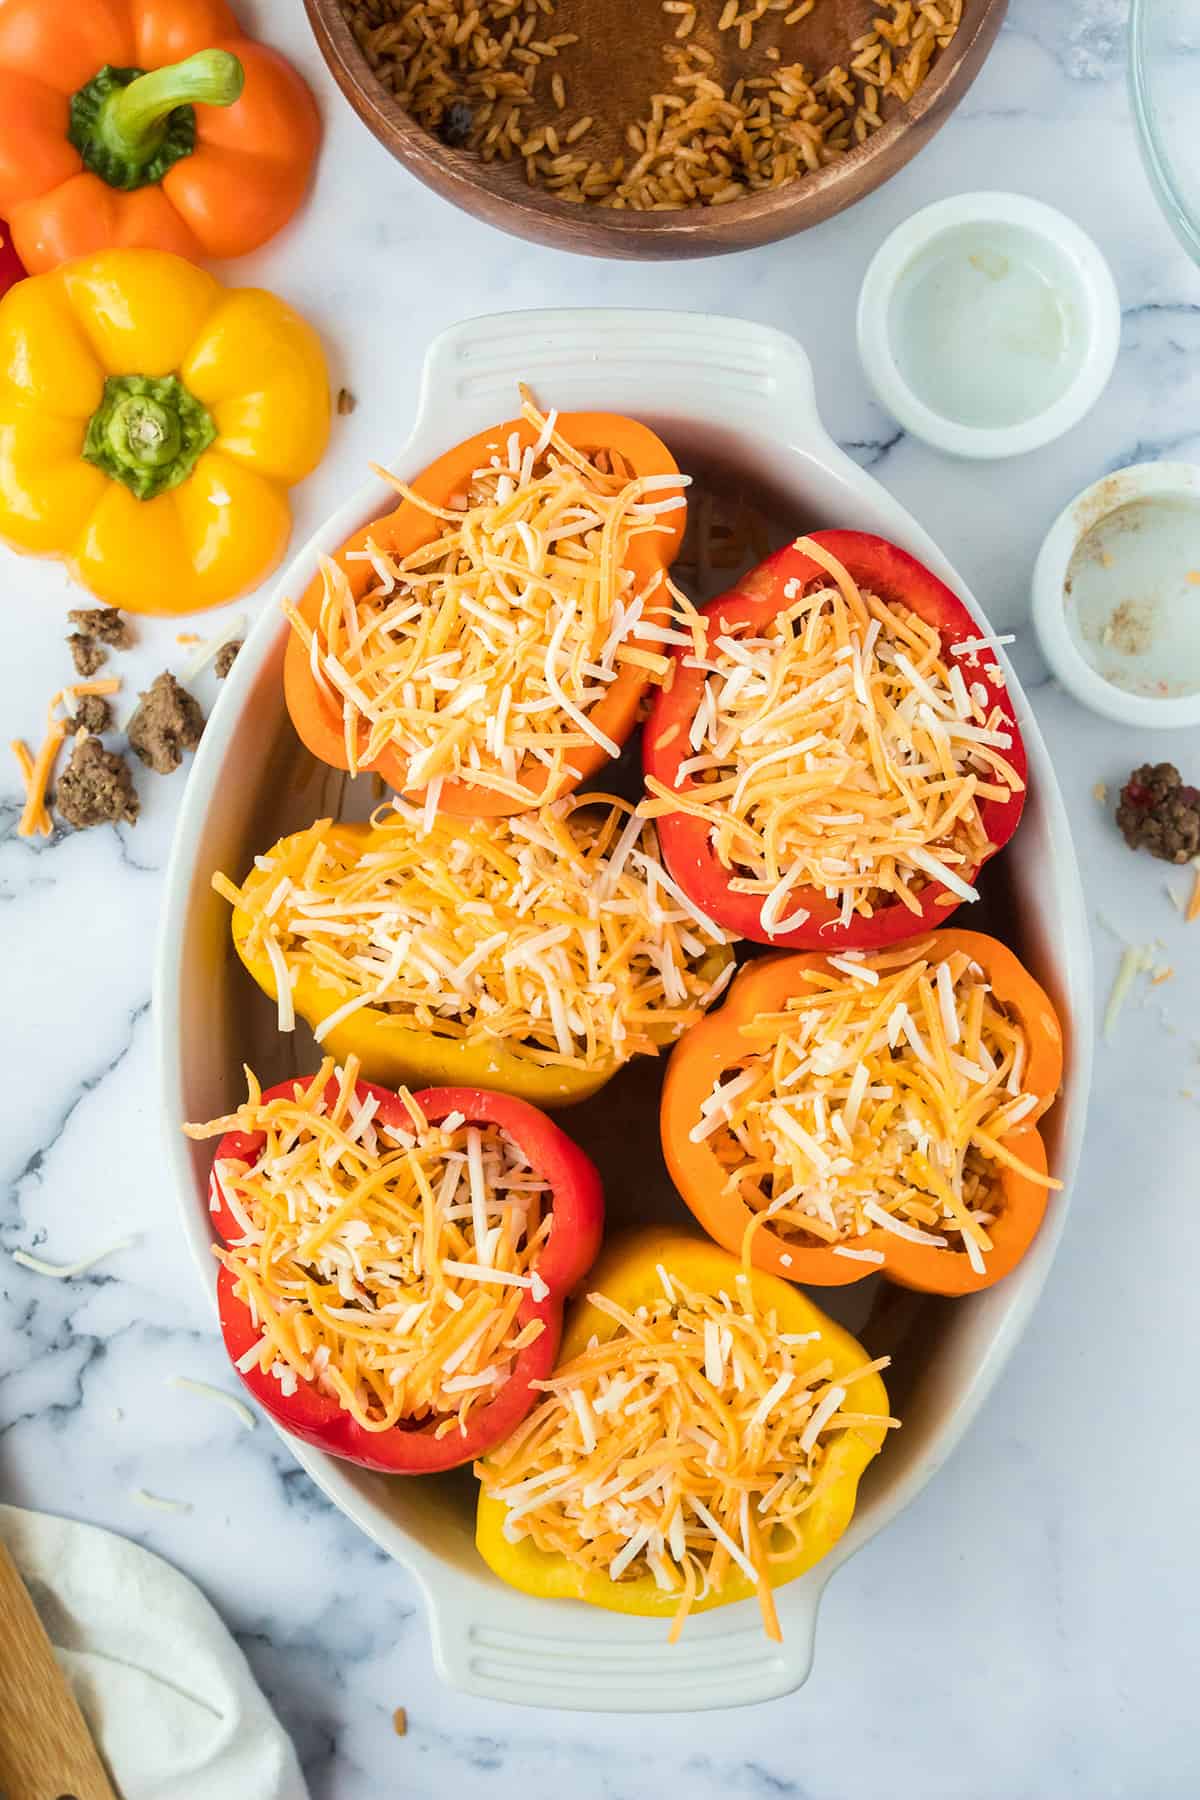 Cheese added to tops of peppers.